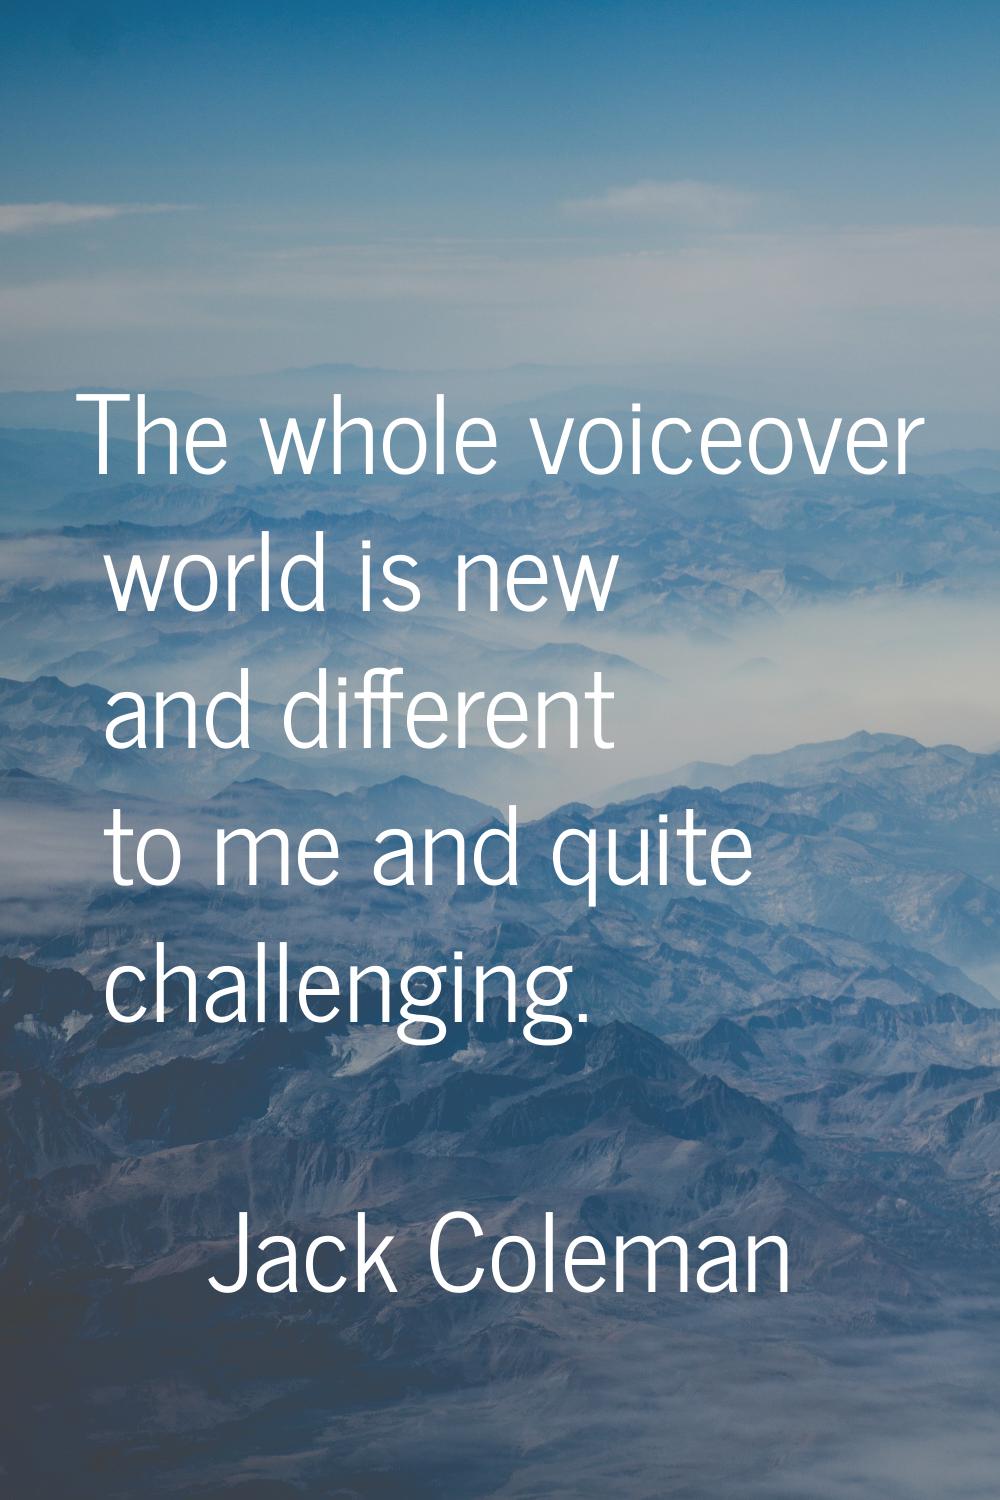 The whole voiceover world is new and different to me and quite challenging.